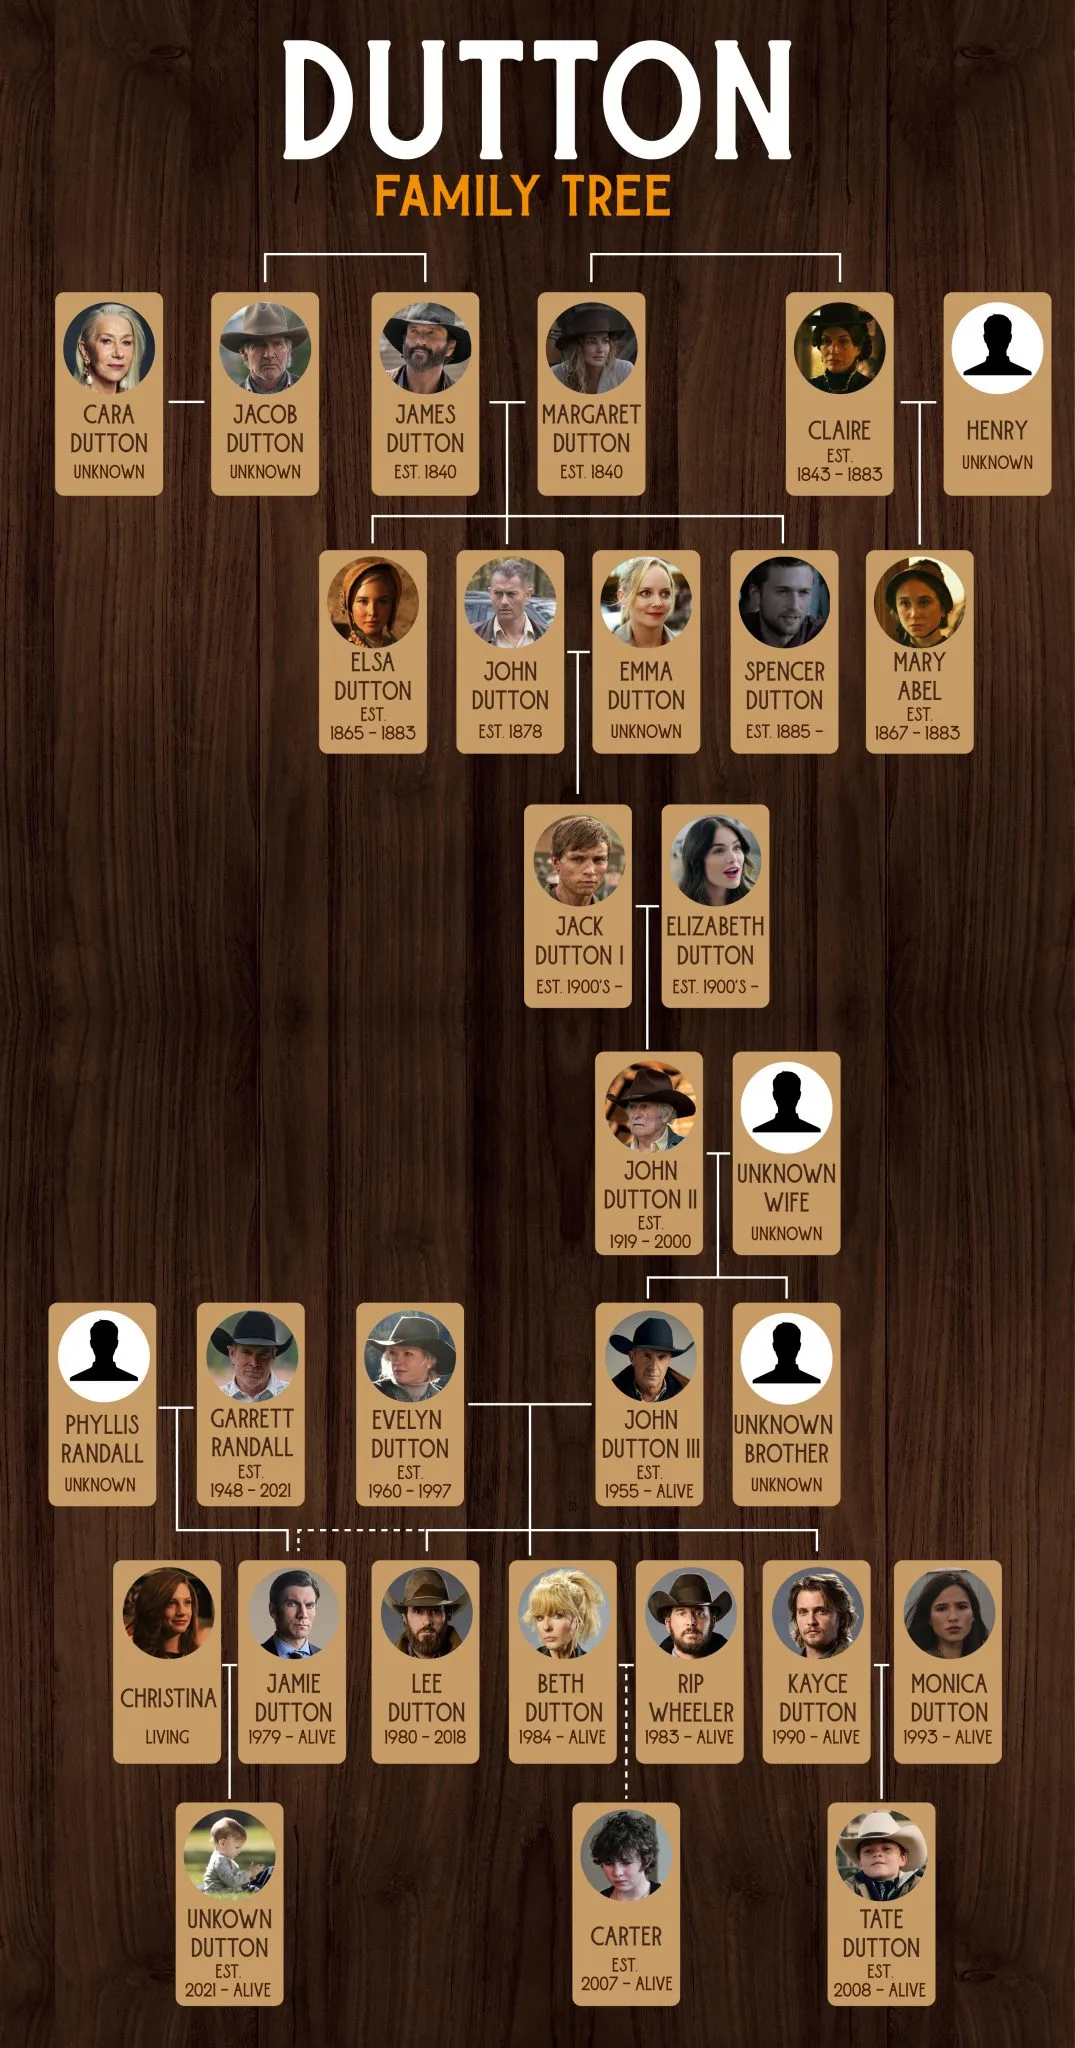 The-Dutton-Family-Tree-Infographic-1075x